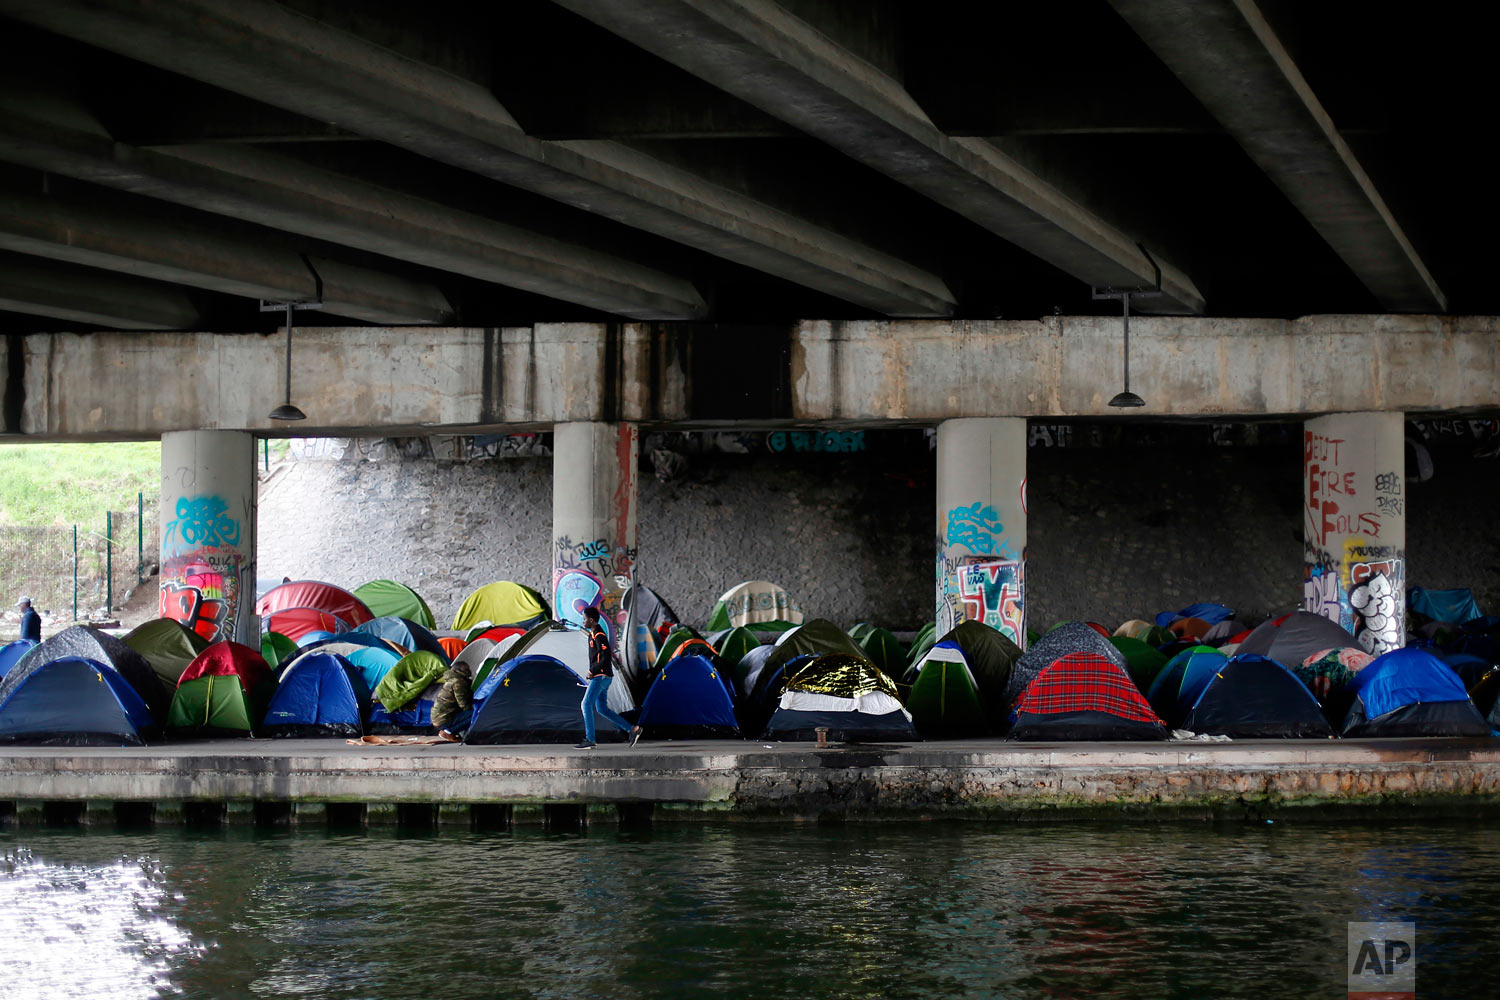  A migrant walks by tents in a makeshift camp along the Canal Saint Denis, in Paris, Wednesday, April 4, 2018. (AP Photo/Thibault Camus) 